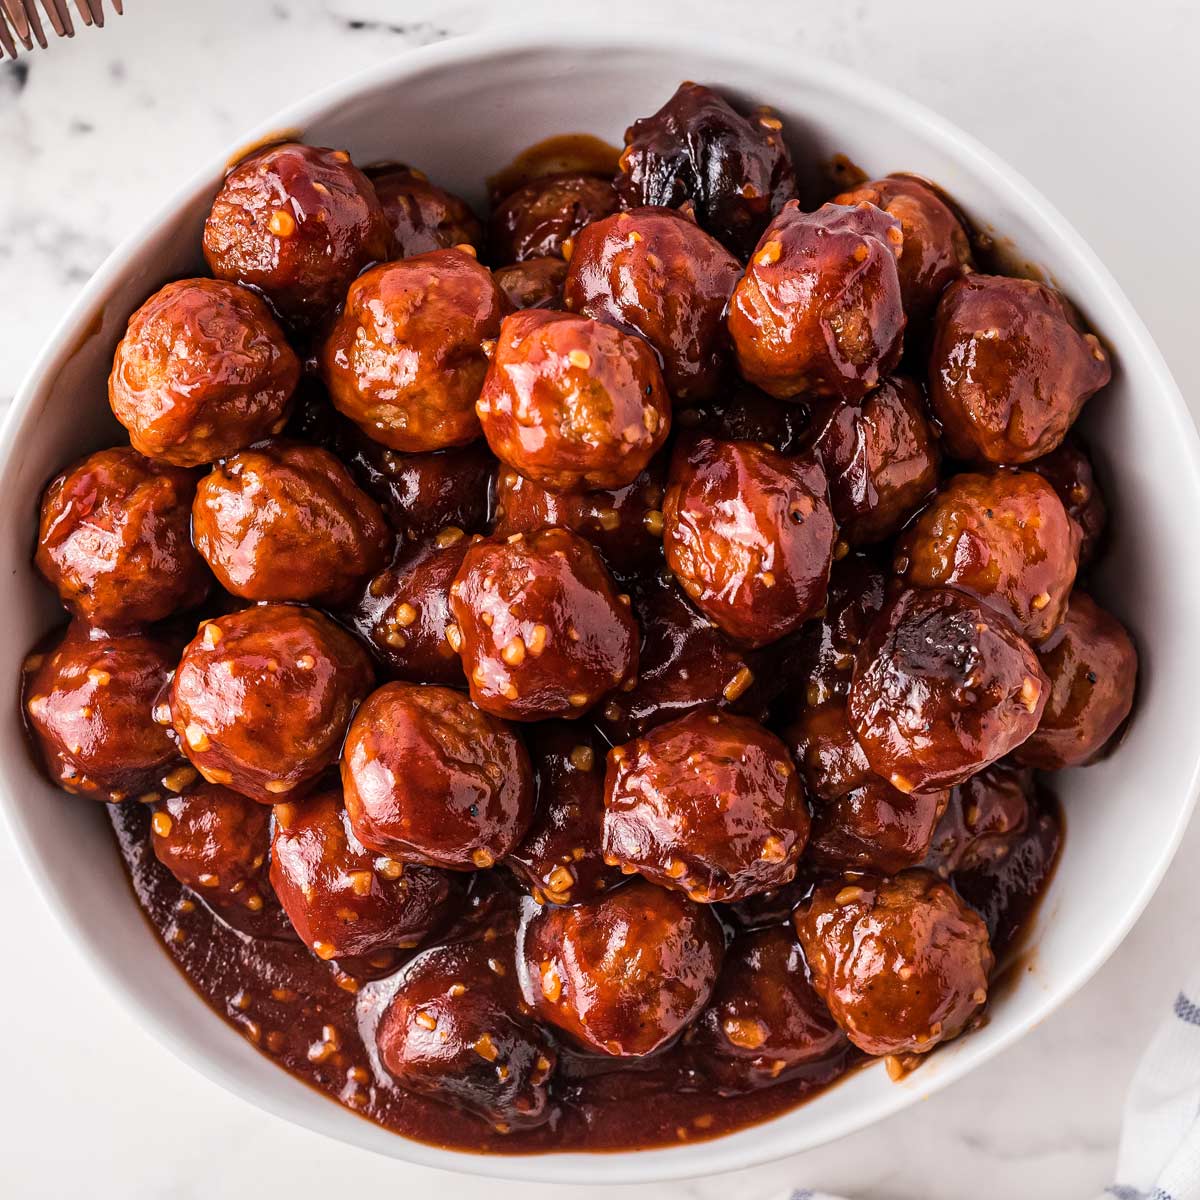 Easy Crockpot Meatballs Recipe - Perfect Appetizer for Game Day!